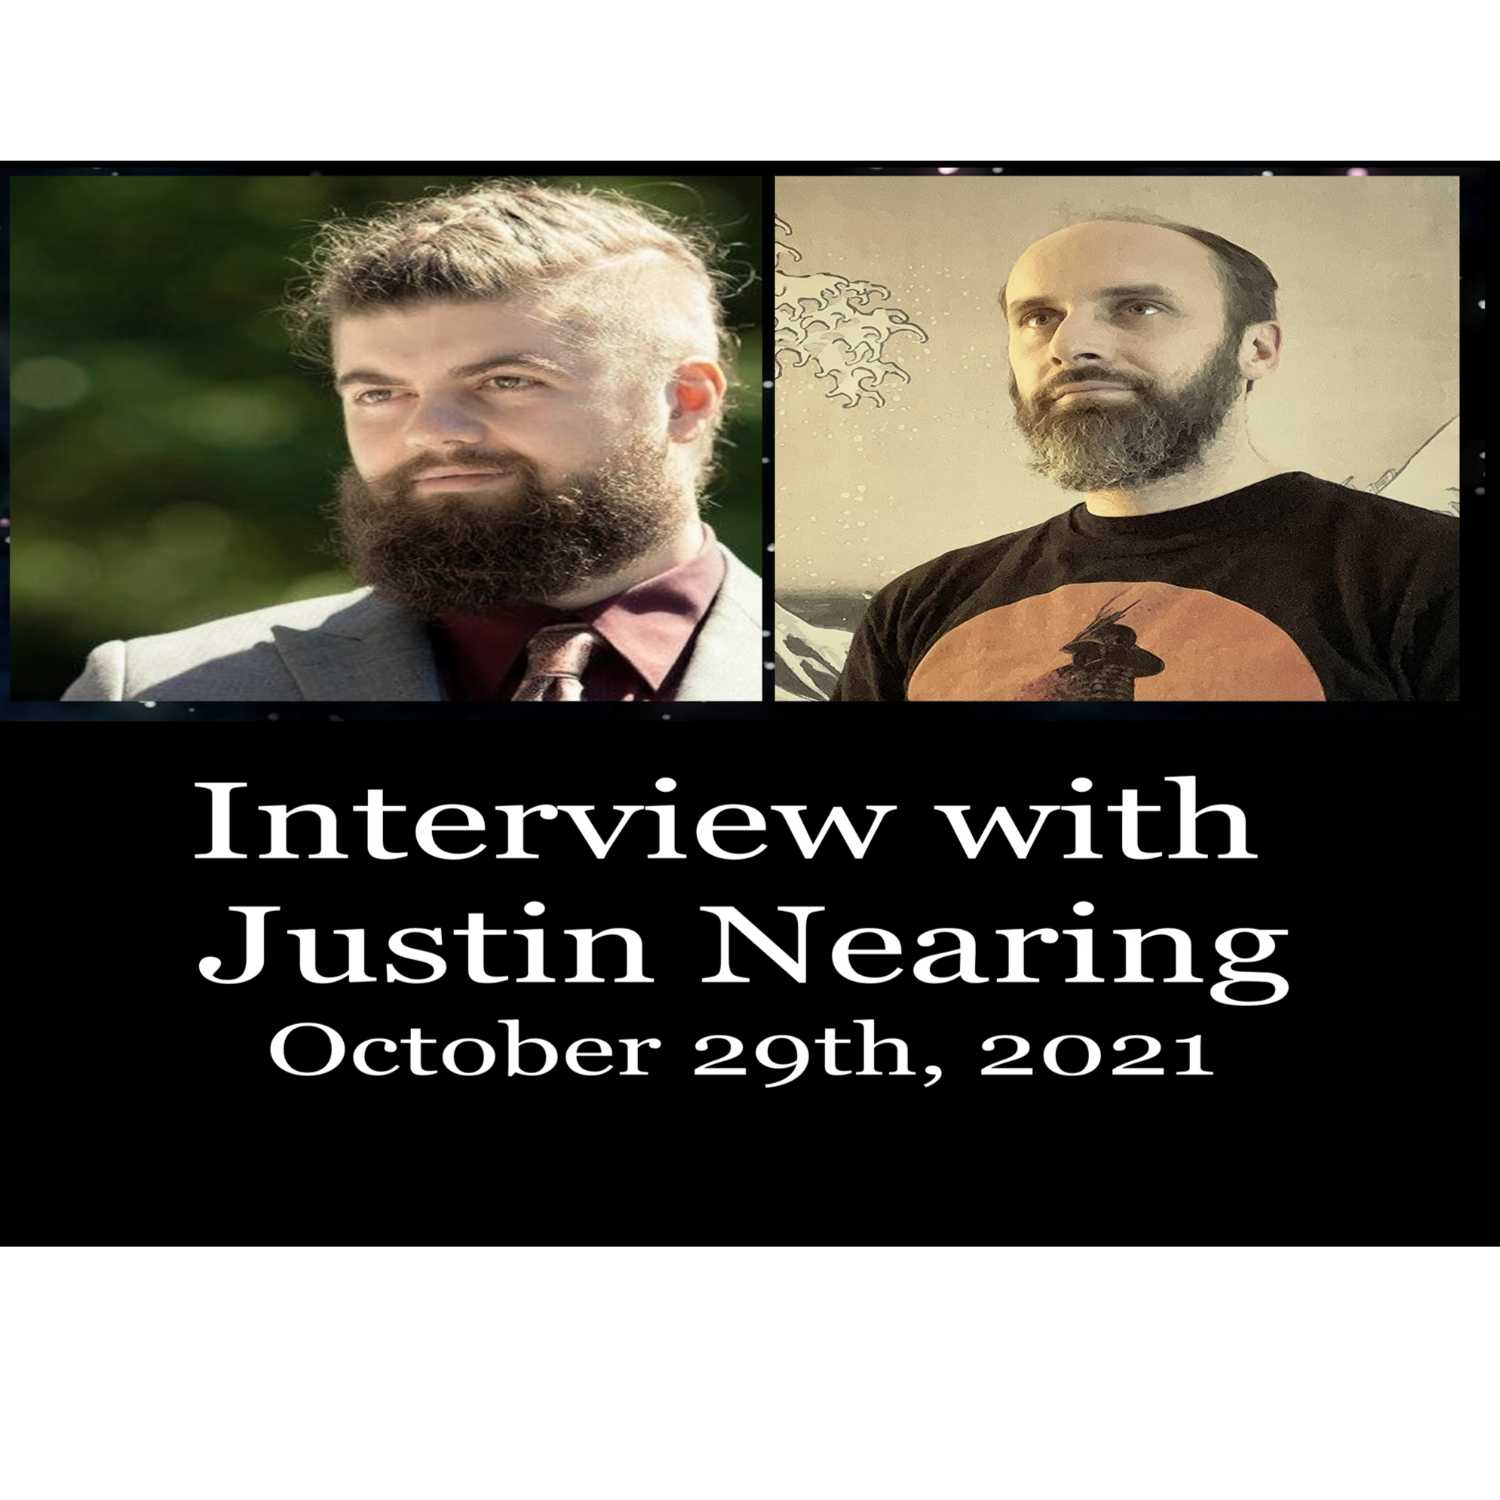 Interview with Justin Nearing October 29th, 2021